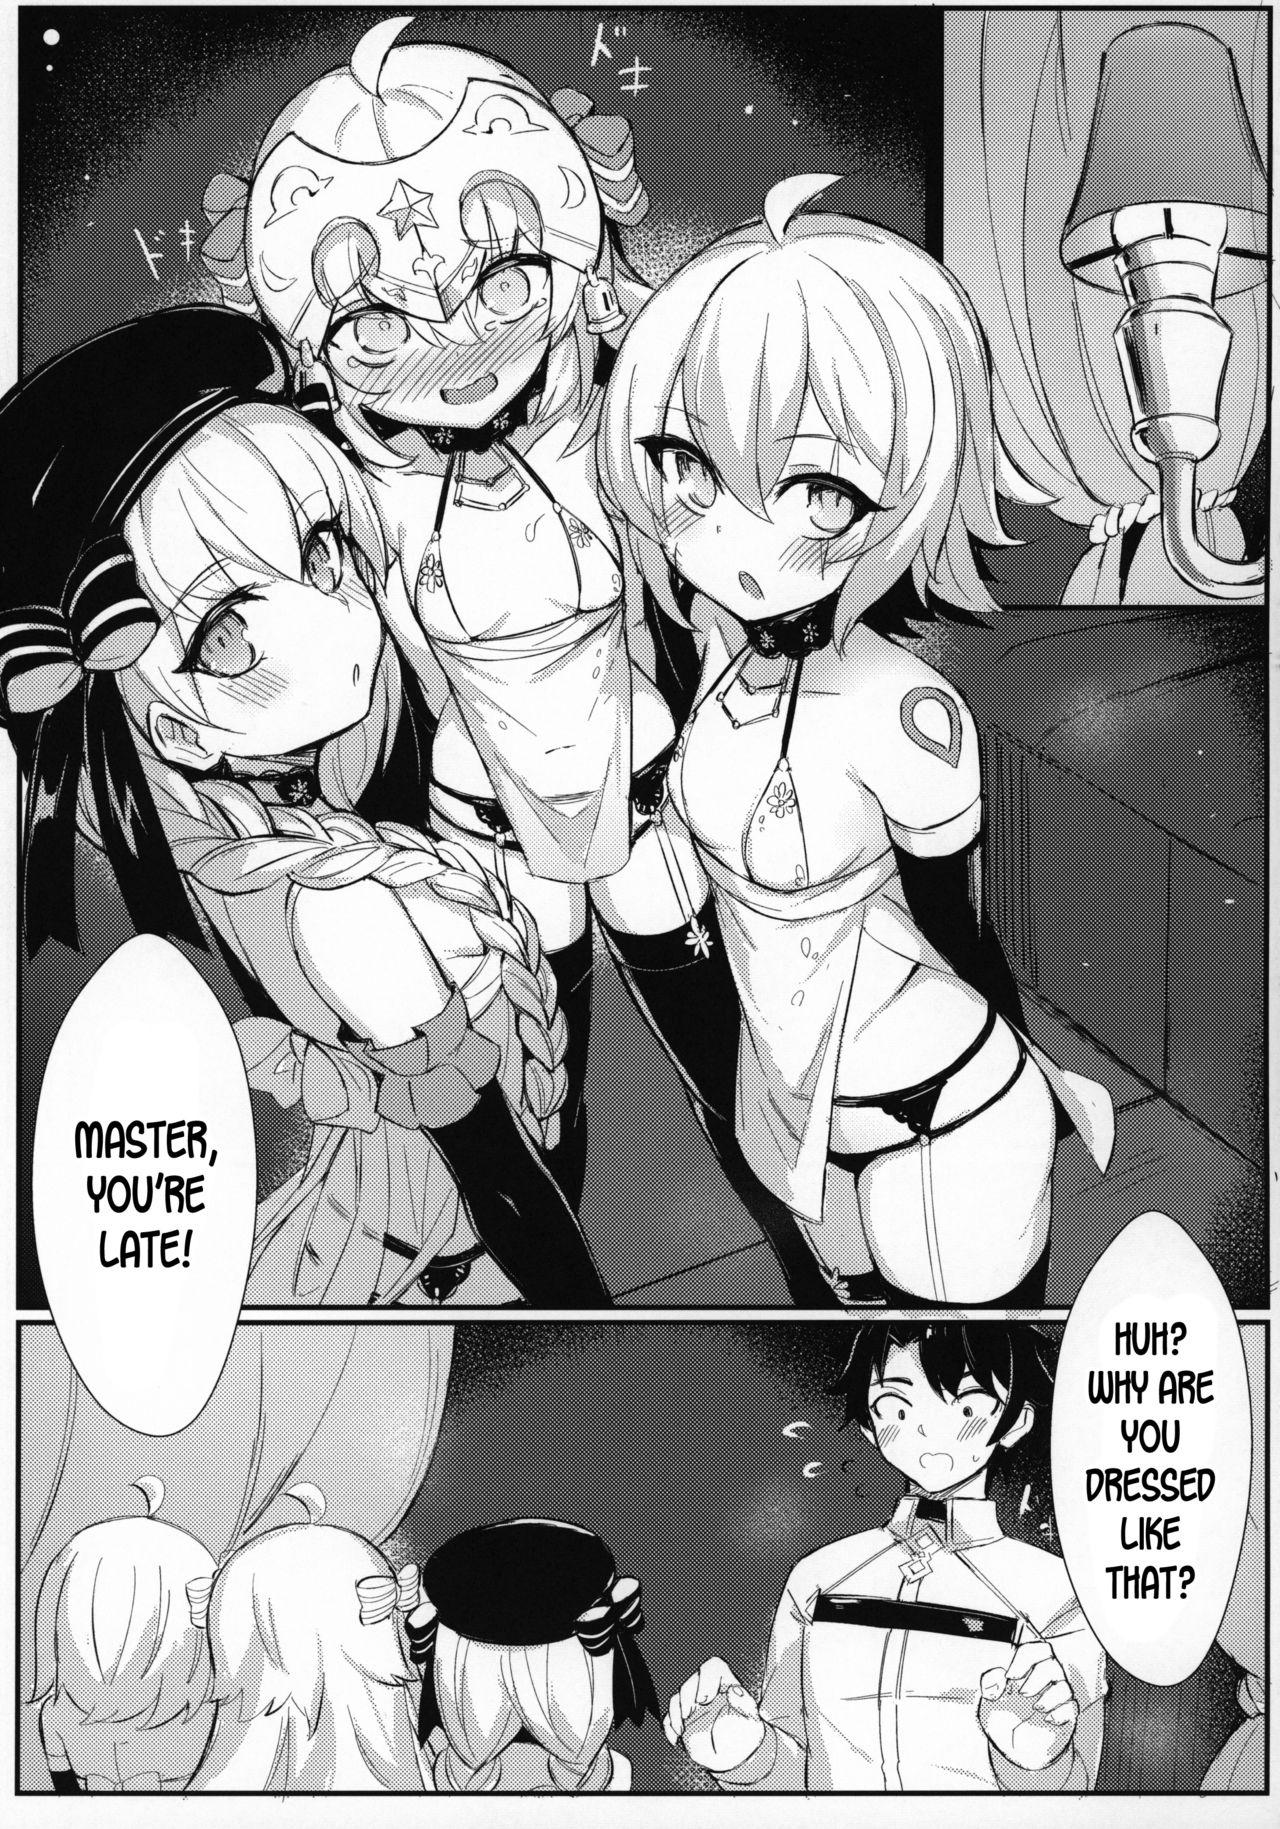 Whipping OH! MASTER - Fate grand order Nasty Porn - Page 4